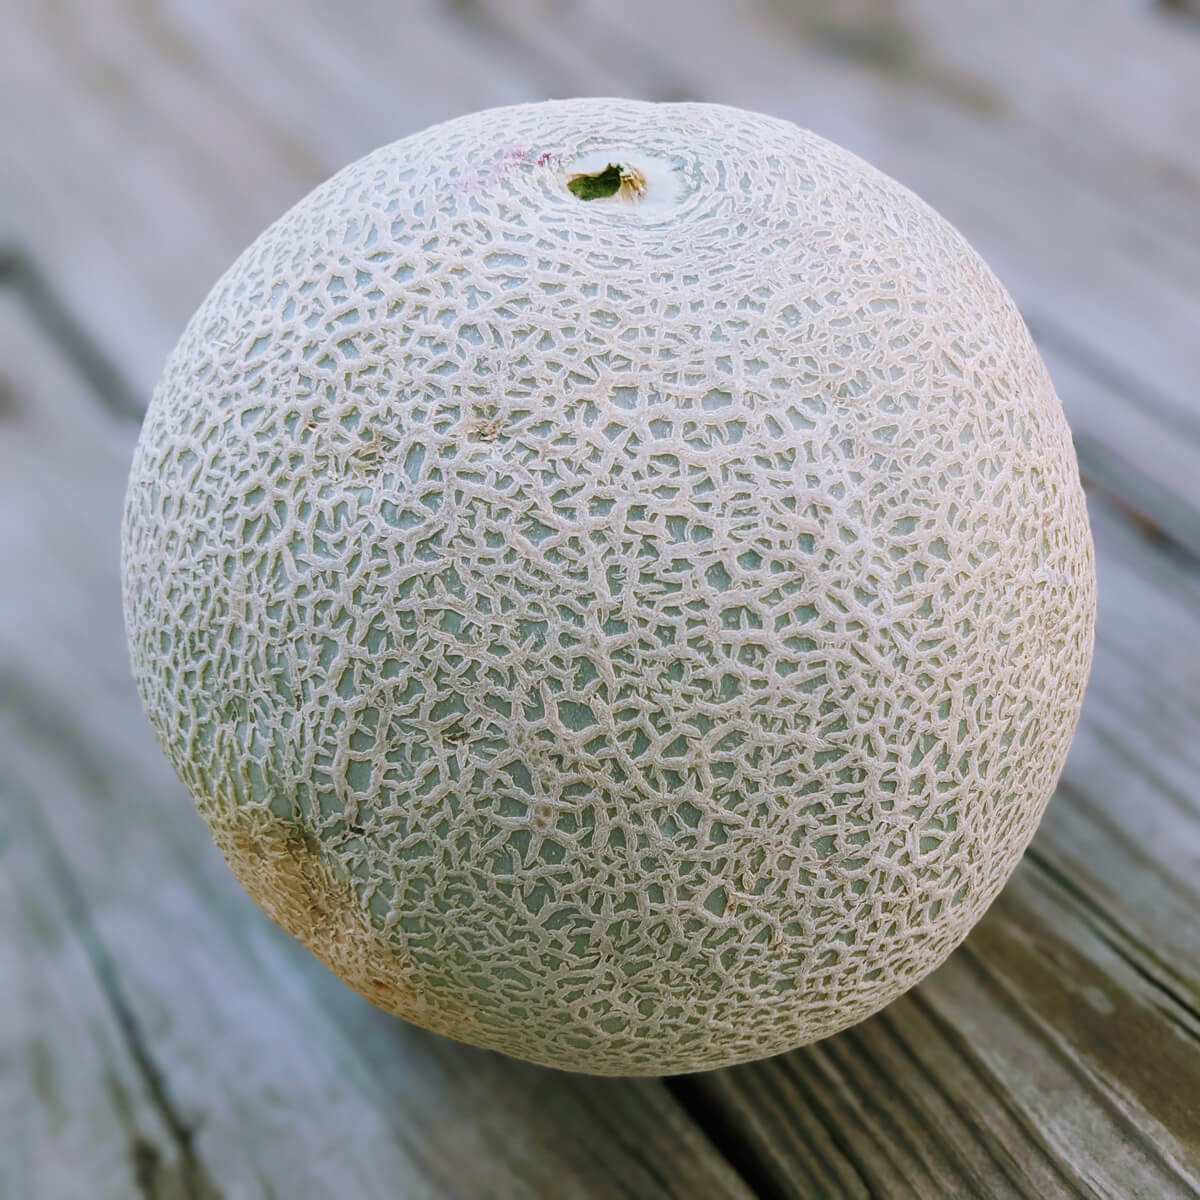 Whole, Fresh Picked Cantaloupe outside on wooden deck